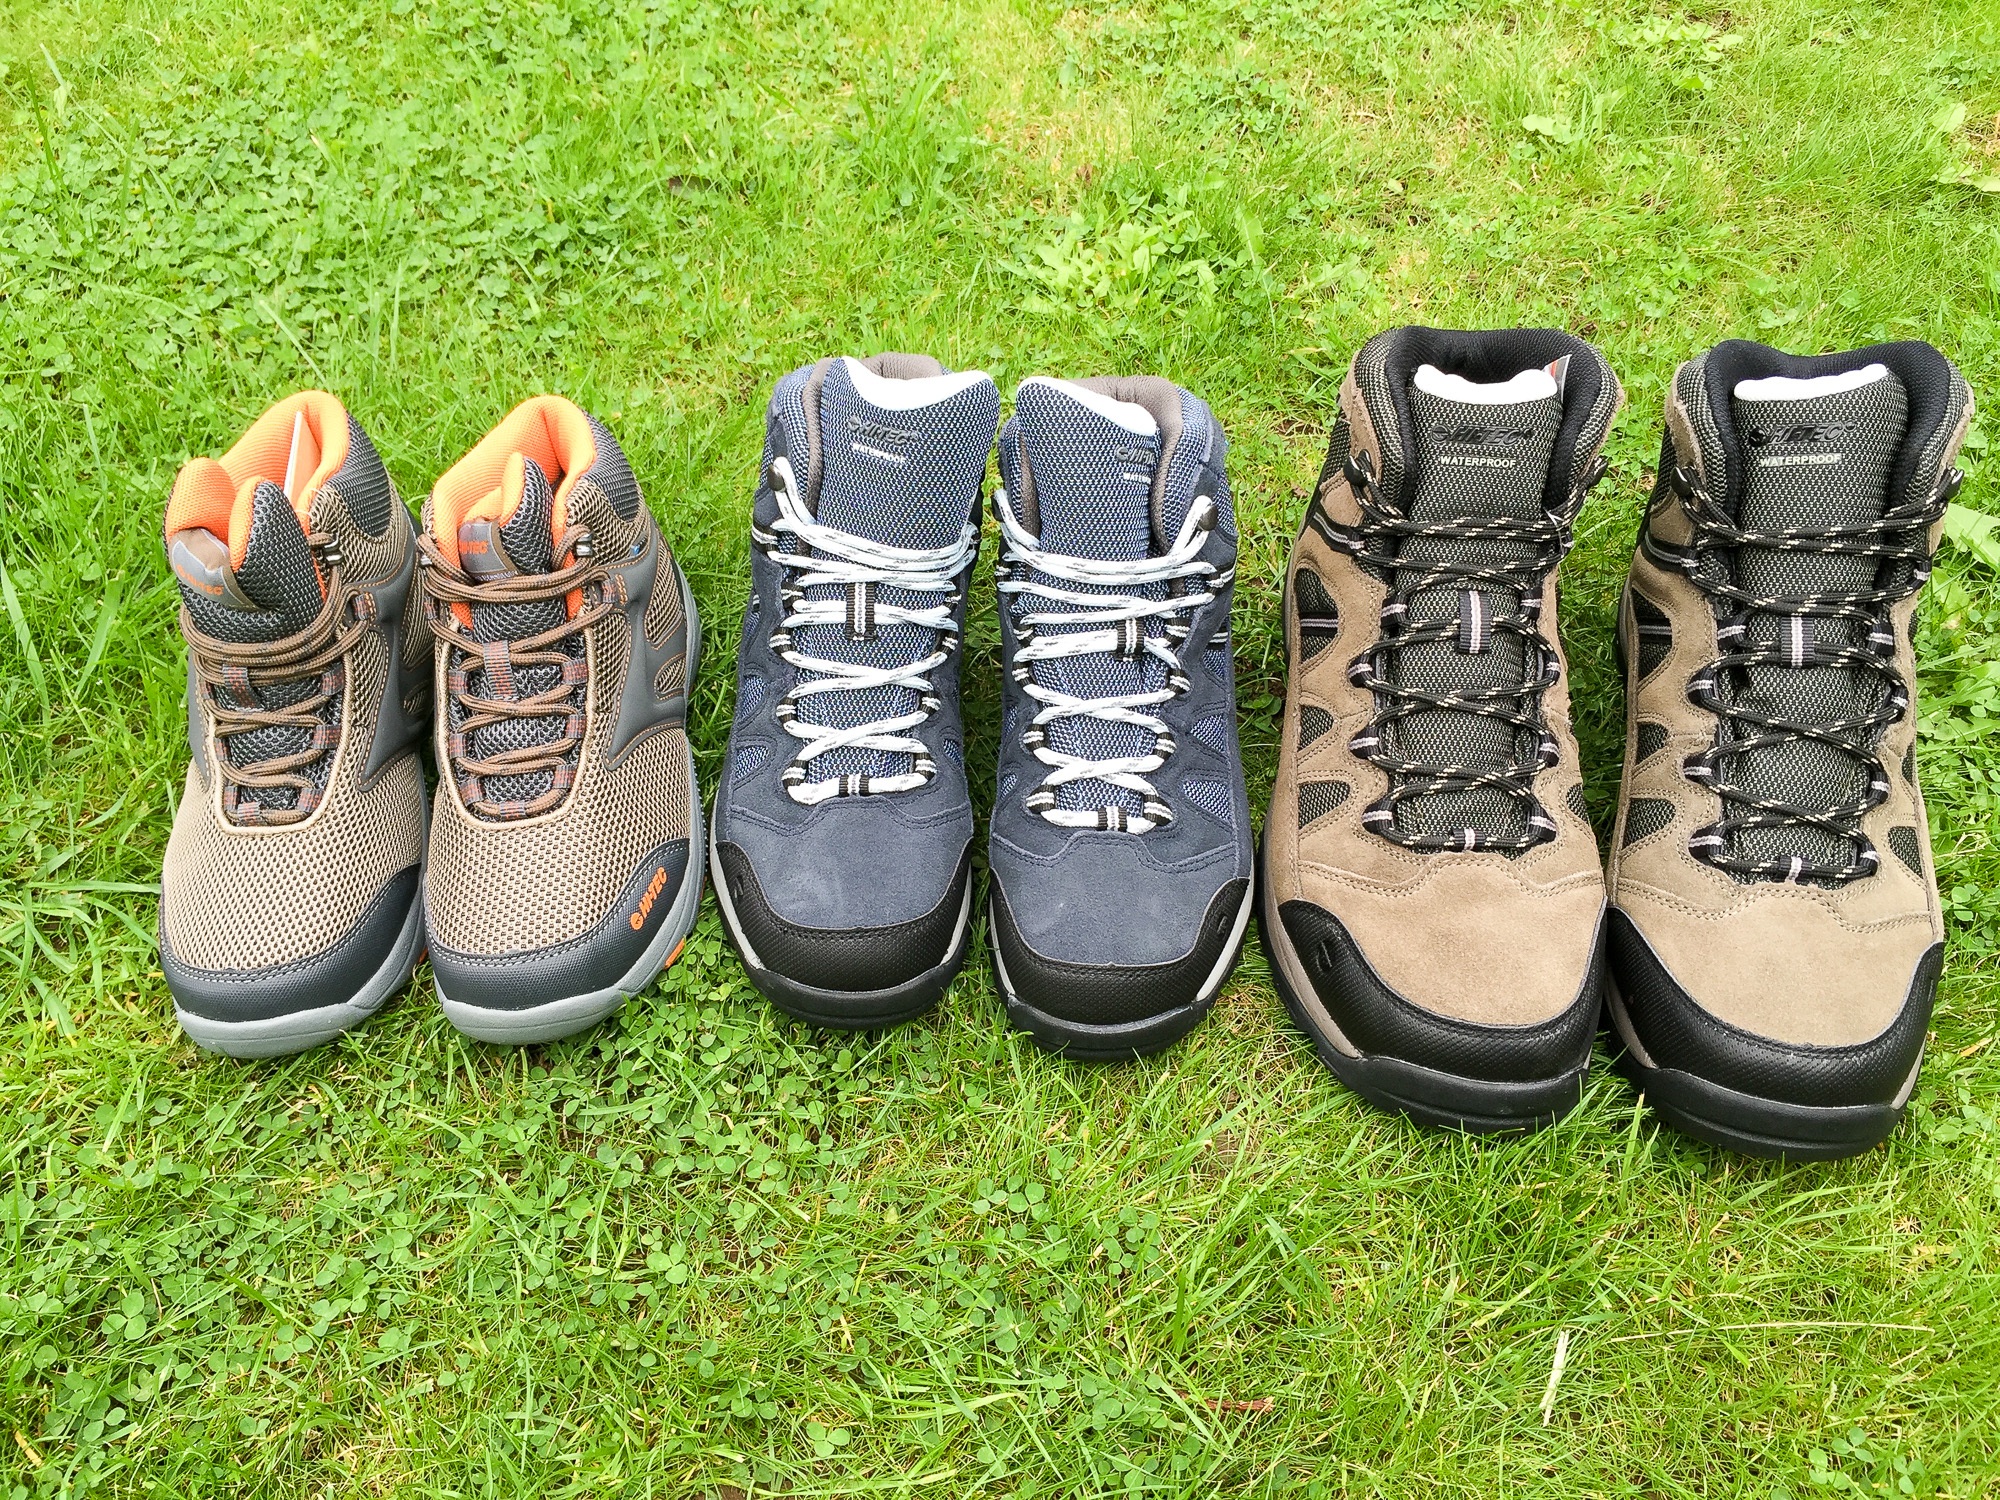 HiTec Boots for the Family